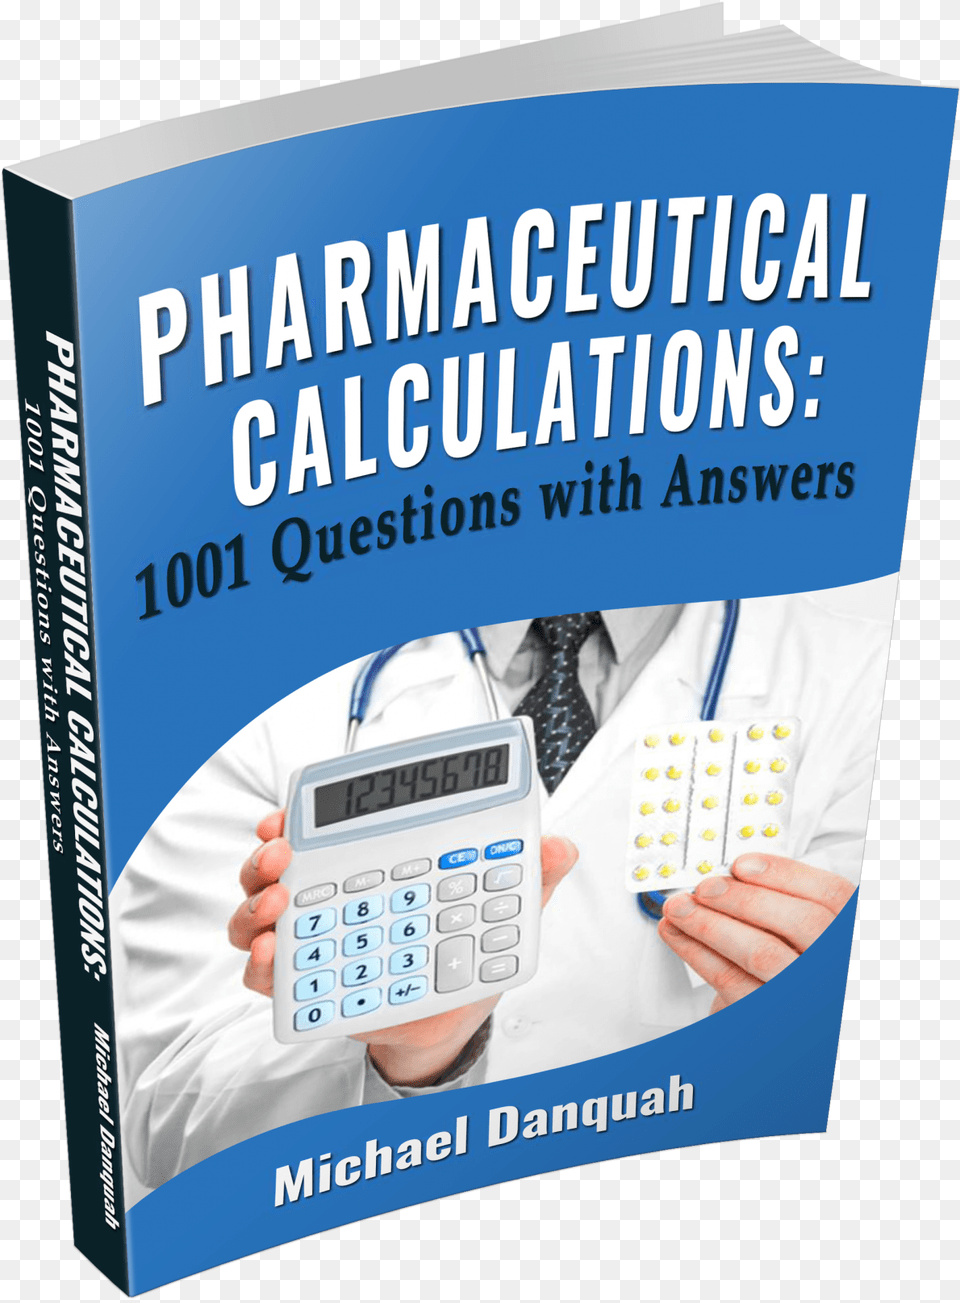 Pharmaceutical Calculations 1001 Questions With Answers Poster, Accessories, Tie, Formal Wear, Electronics Free Png